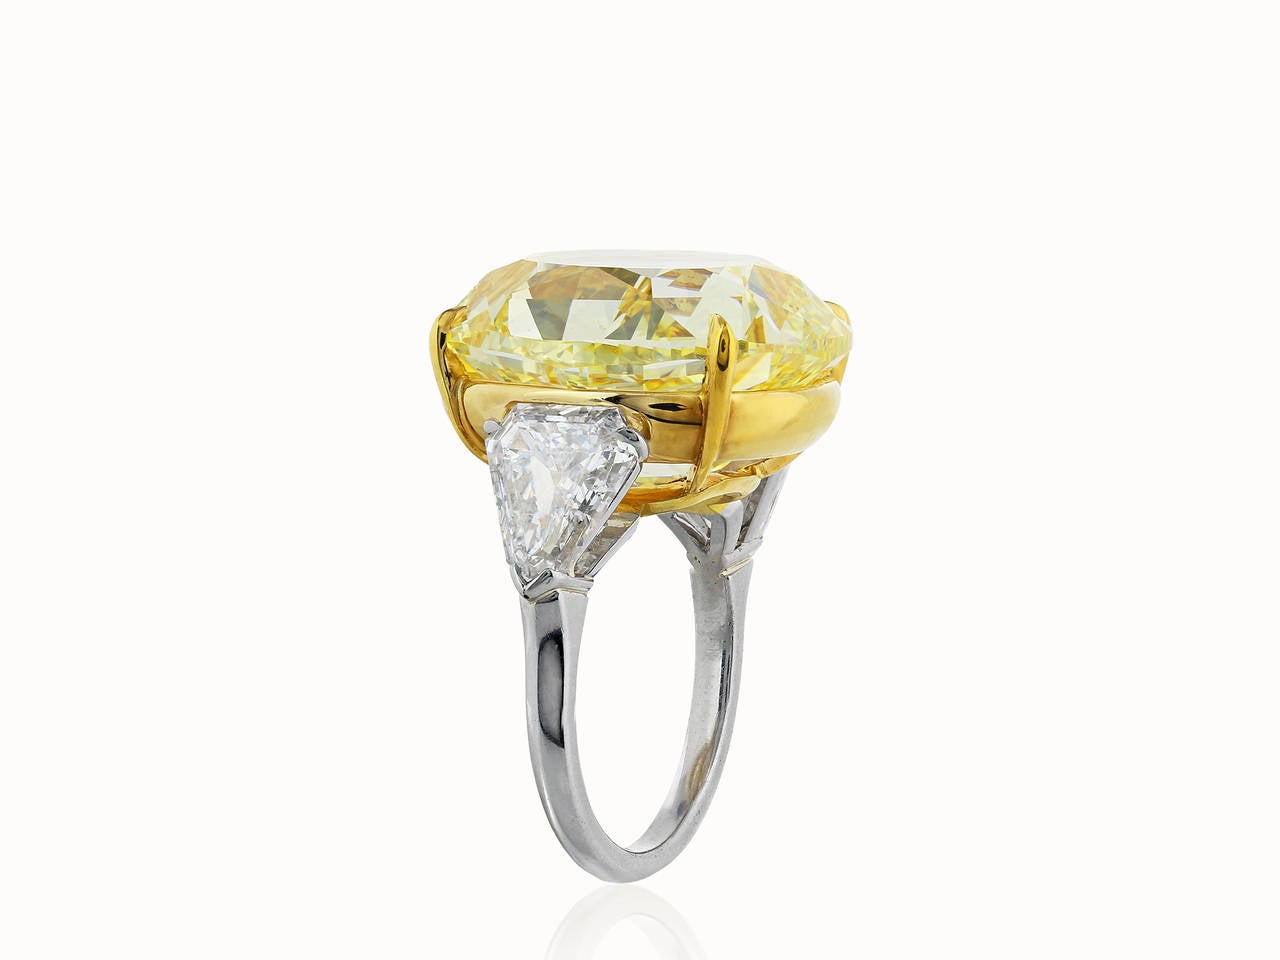 Platinum and 18 karat yellow gold custom made 3 stone ring consisting of 1 cushion cut canary diamond weighing 28.02 carats having a color and clarity of FIY/VS2 with GIA certificate, the center stone is flanked by 1 brilliant cut shield shaped